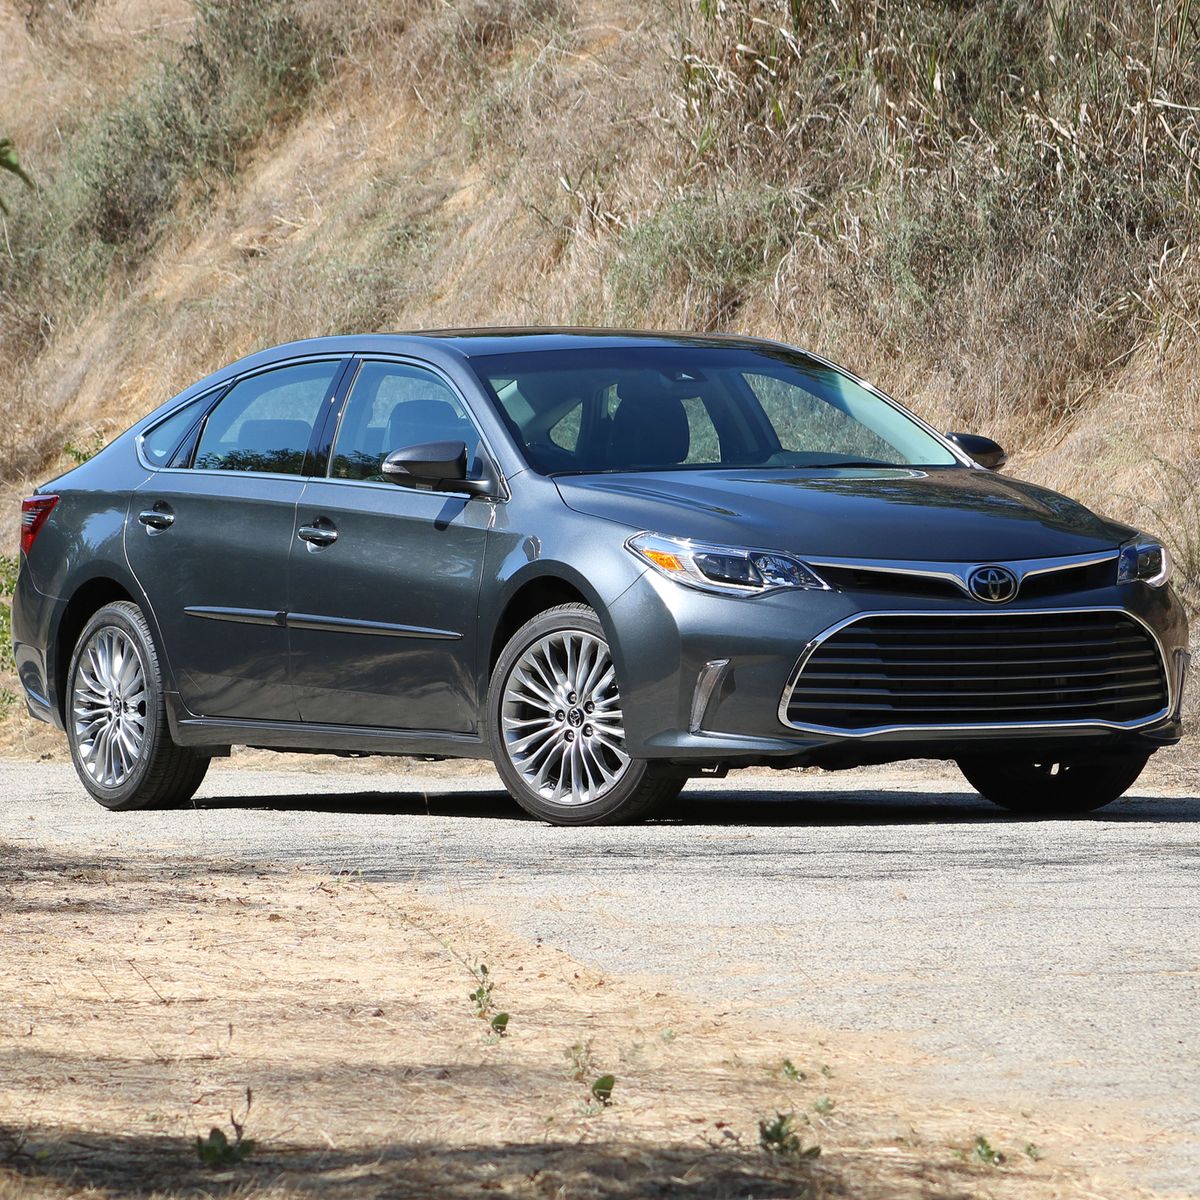 2018 Toyota Avalon Review: Relaxed-Fit Sedan